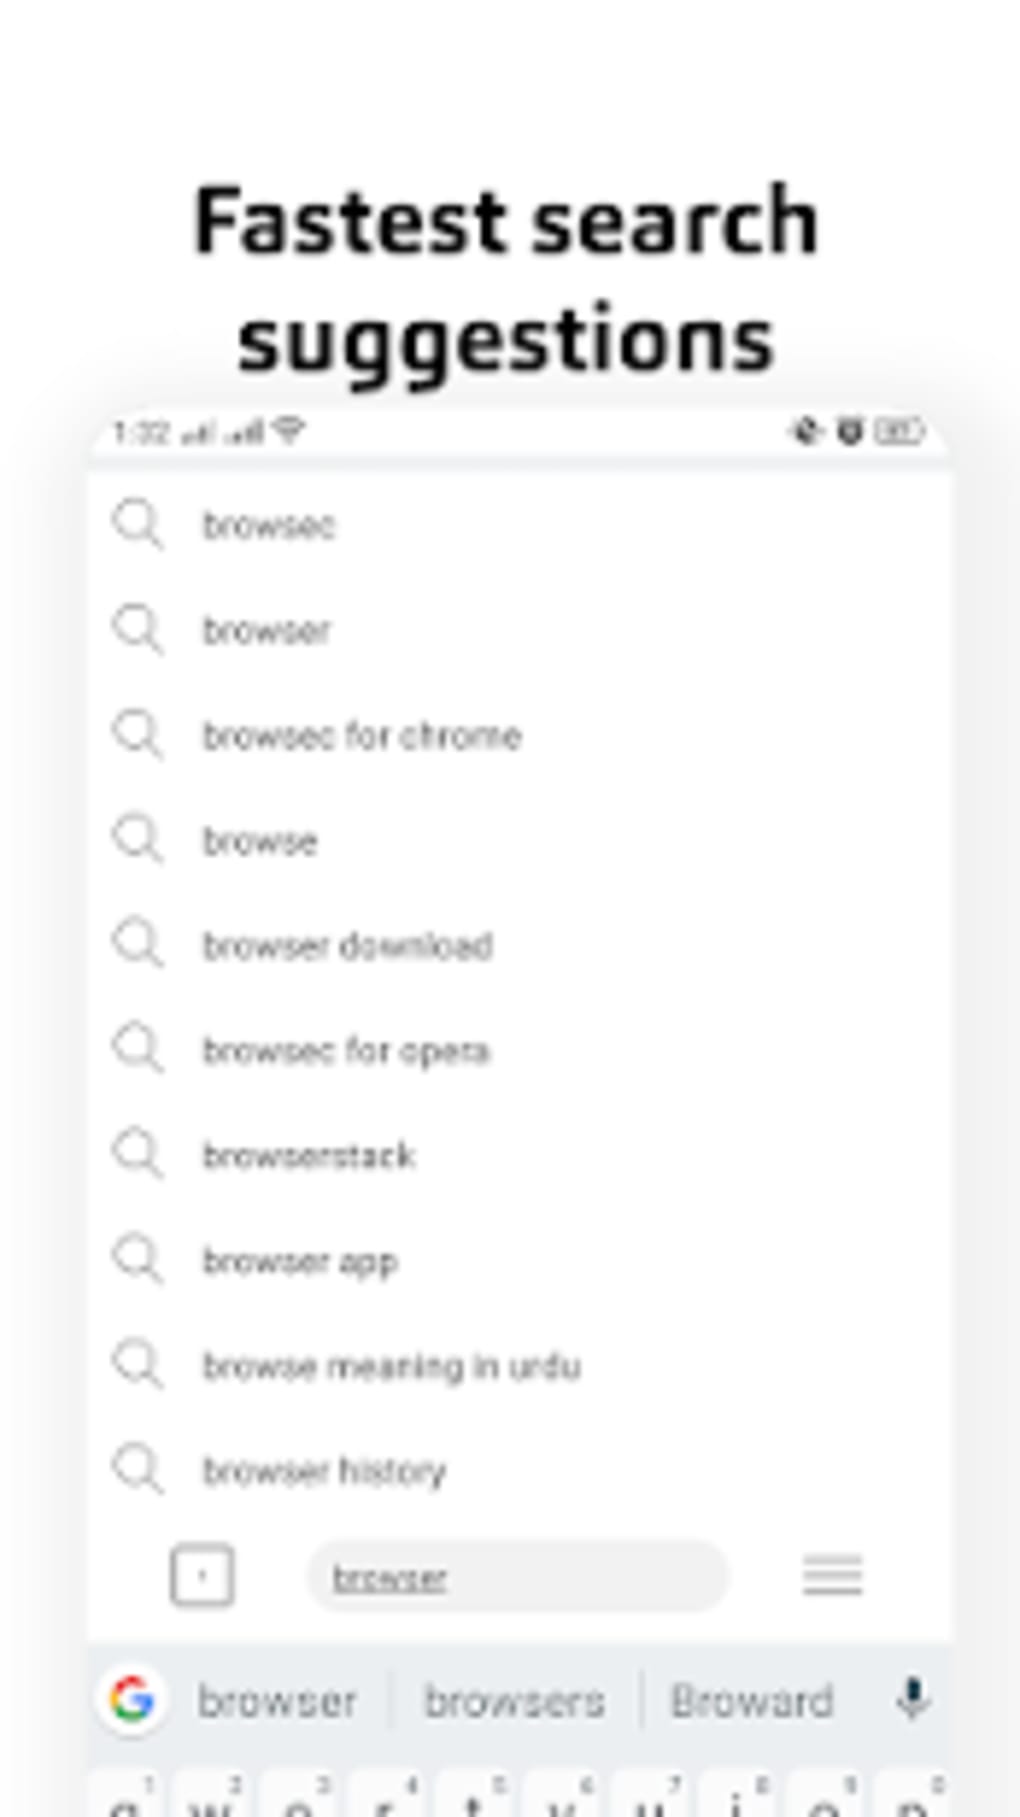 Private Browser-Incognito&Safe - Apps on Google Play